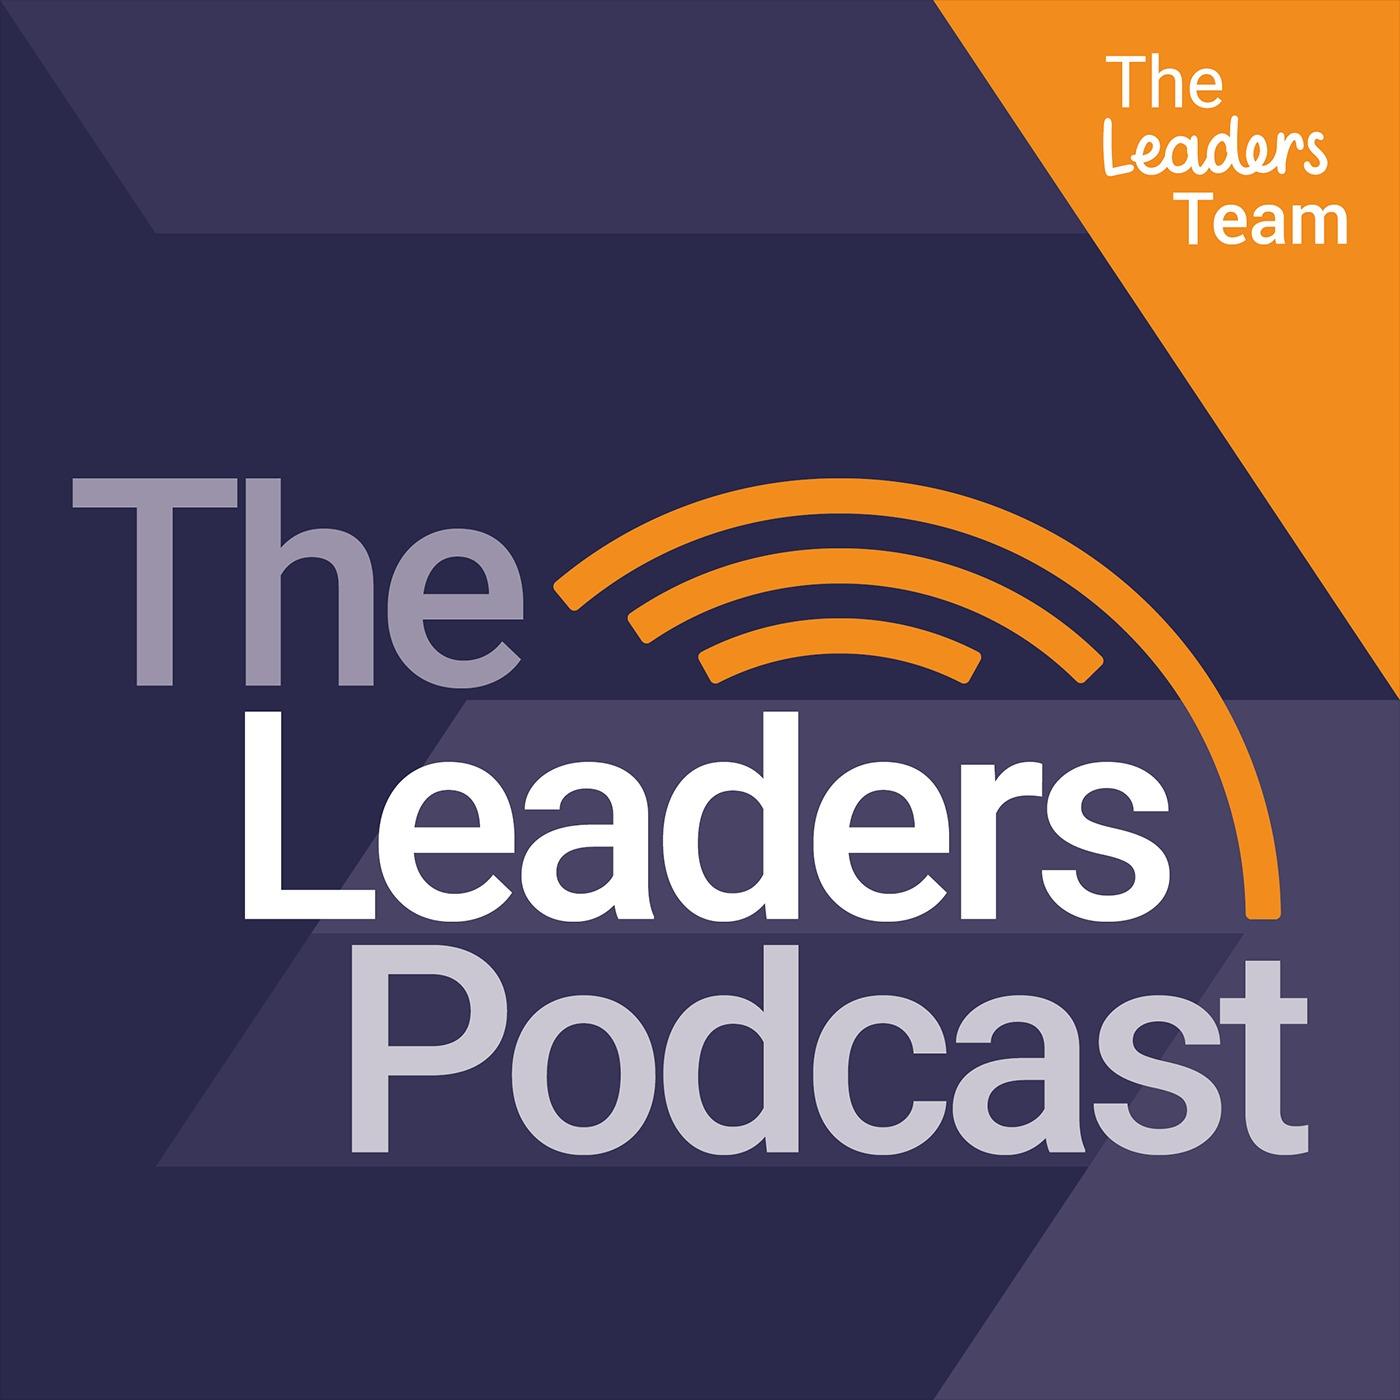 The Leaders Team Podcast